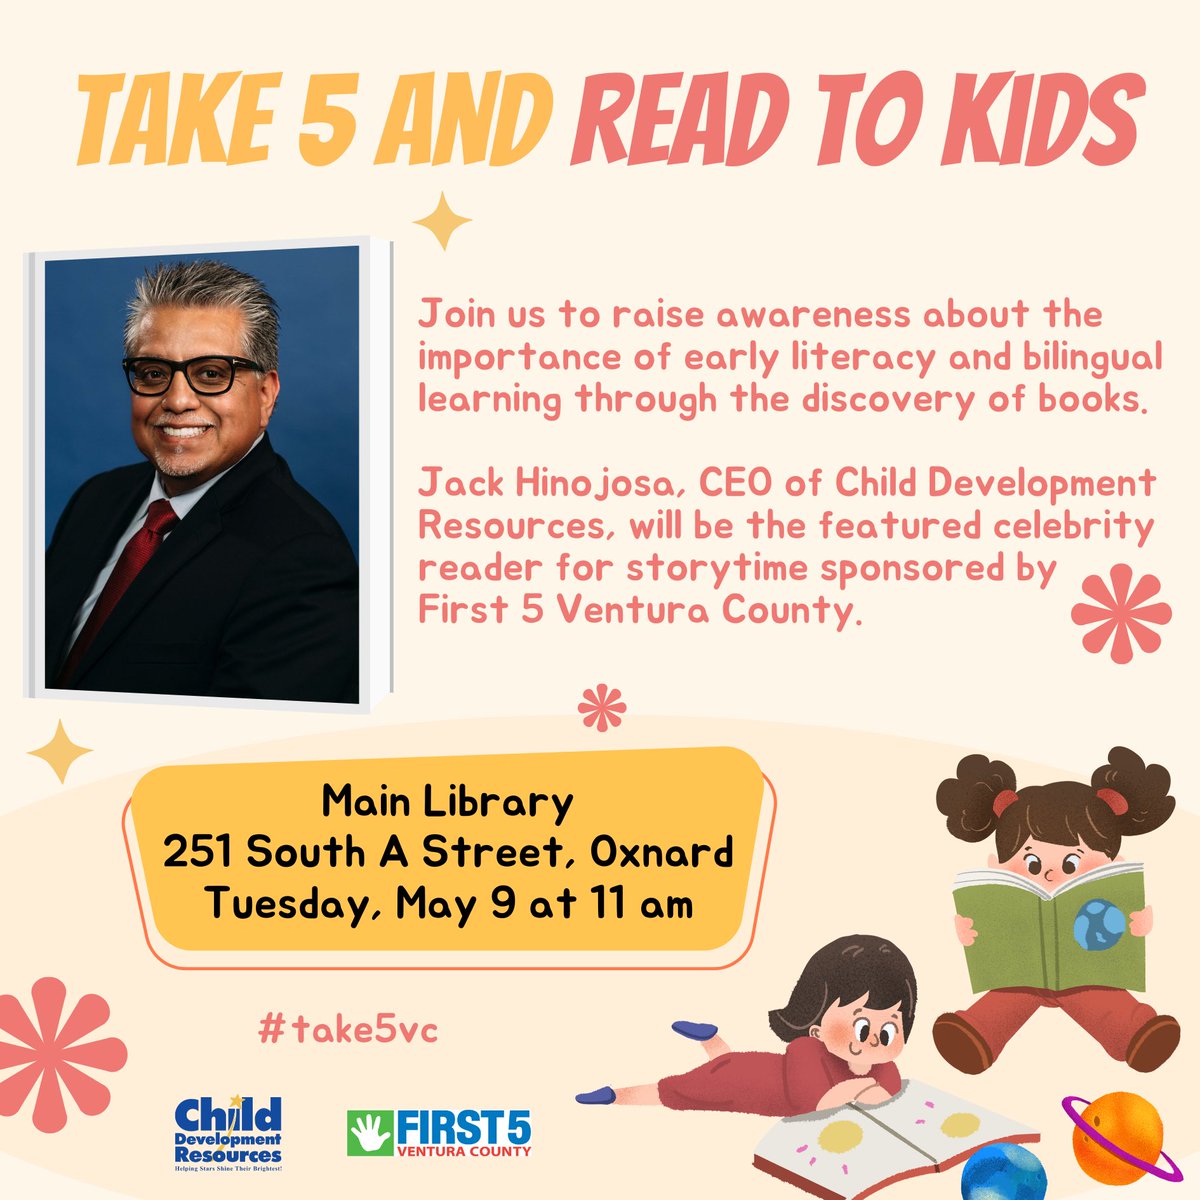 We’re excited to have our CEO, Jack Hinojosa, as the invited celebrity reader for storytime May 9 at 11 am at the Main Library, 251 South A Street, #Oxnard.  The event is organized by @First5Ventura as part of their annual Take 5 and Read to Kids campaign. See u there.  #take5vc